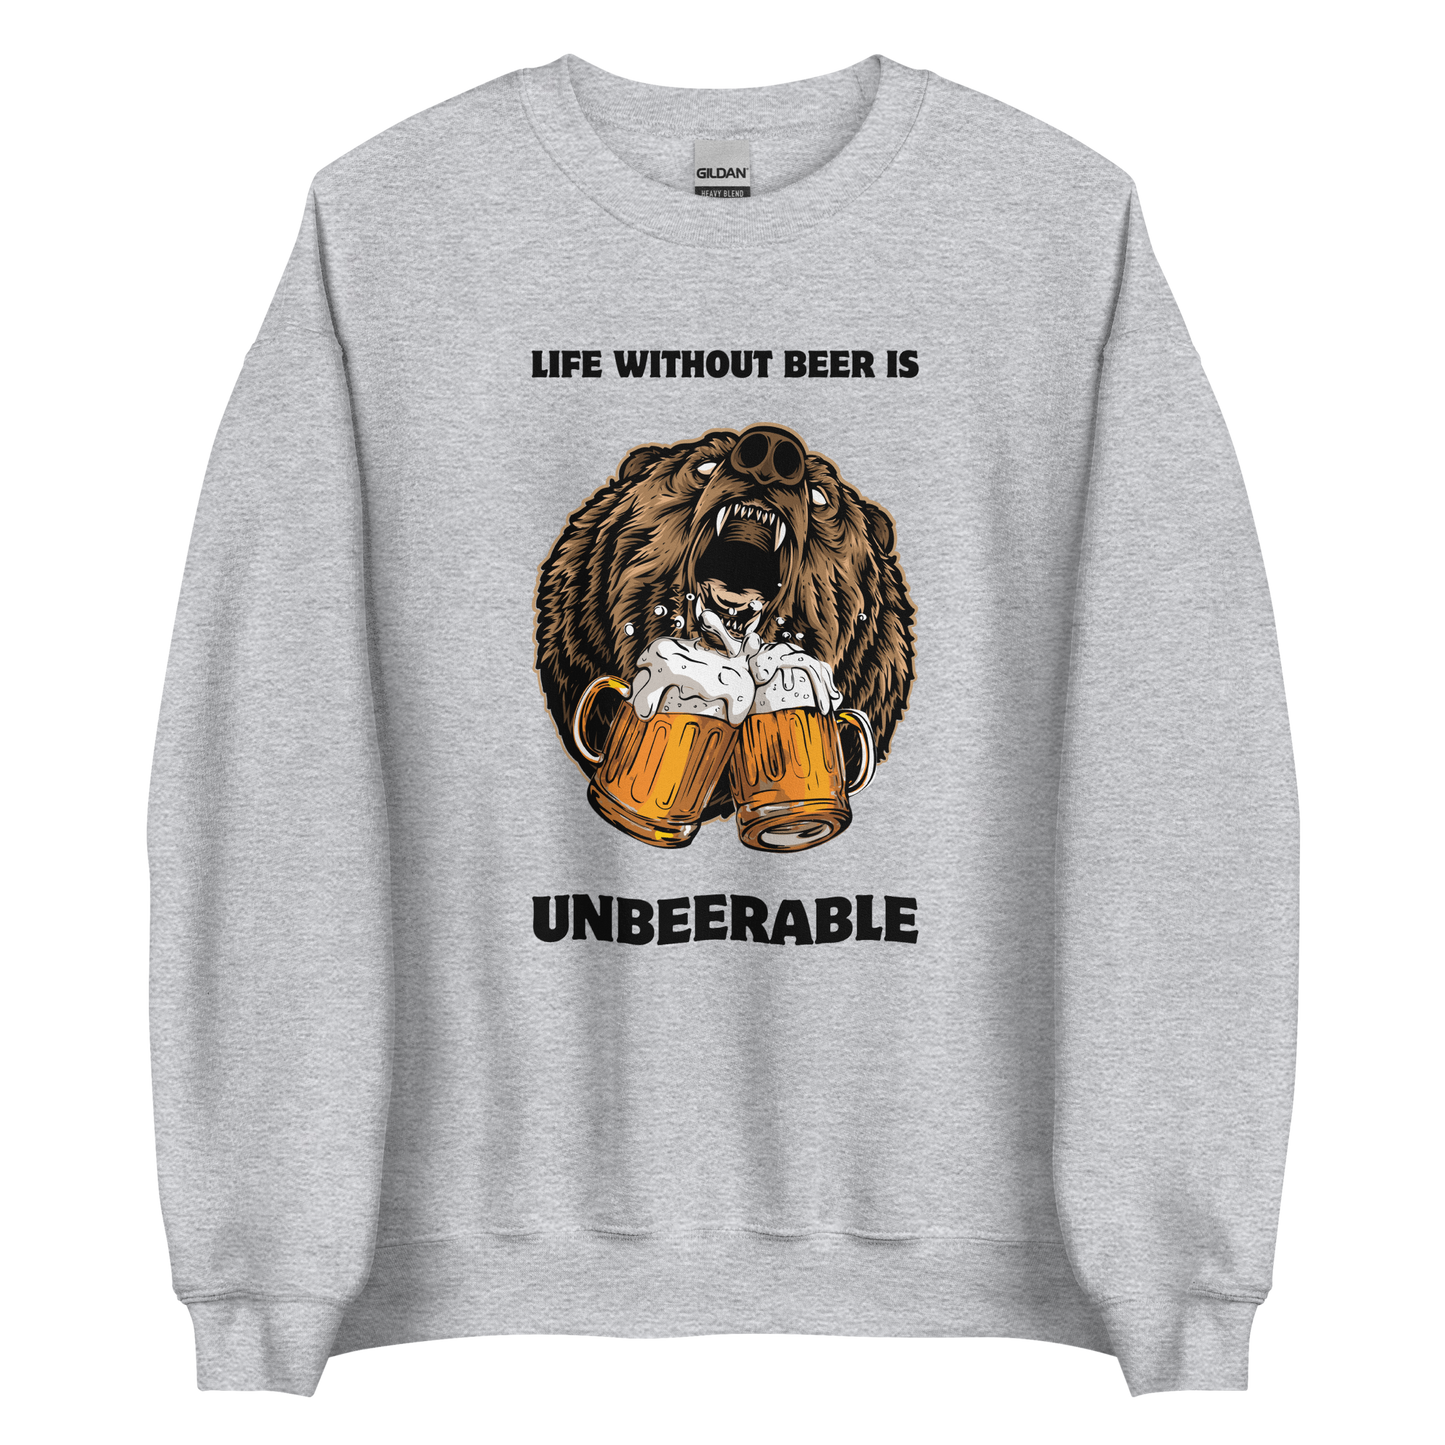 Sport Grey Bear Sweatshirt featuring a Life Without Beer Is Unbeerable graphic on the chest - Funny Graphic Bear Sweatshirts - Boozy Fox